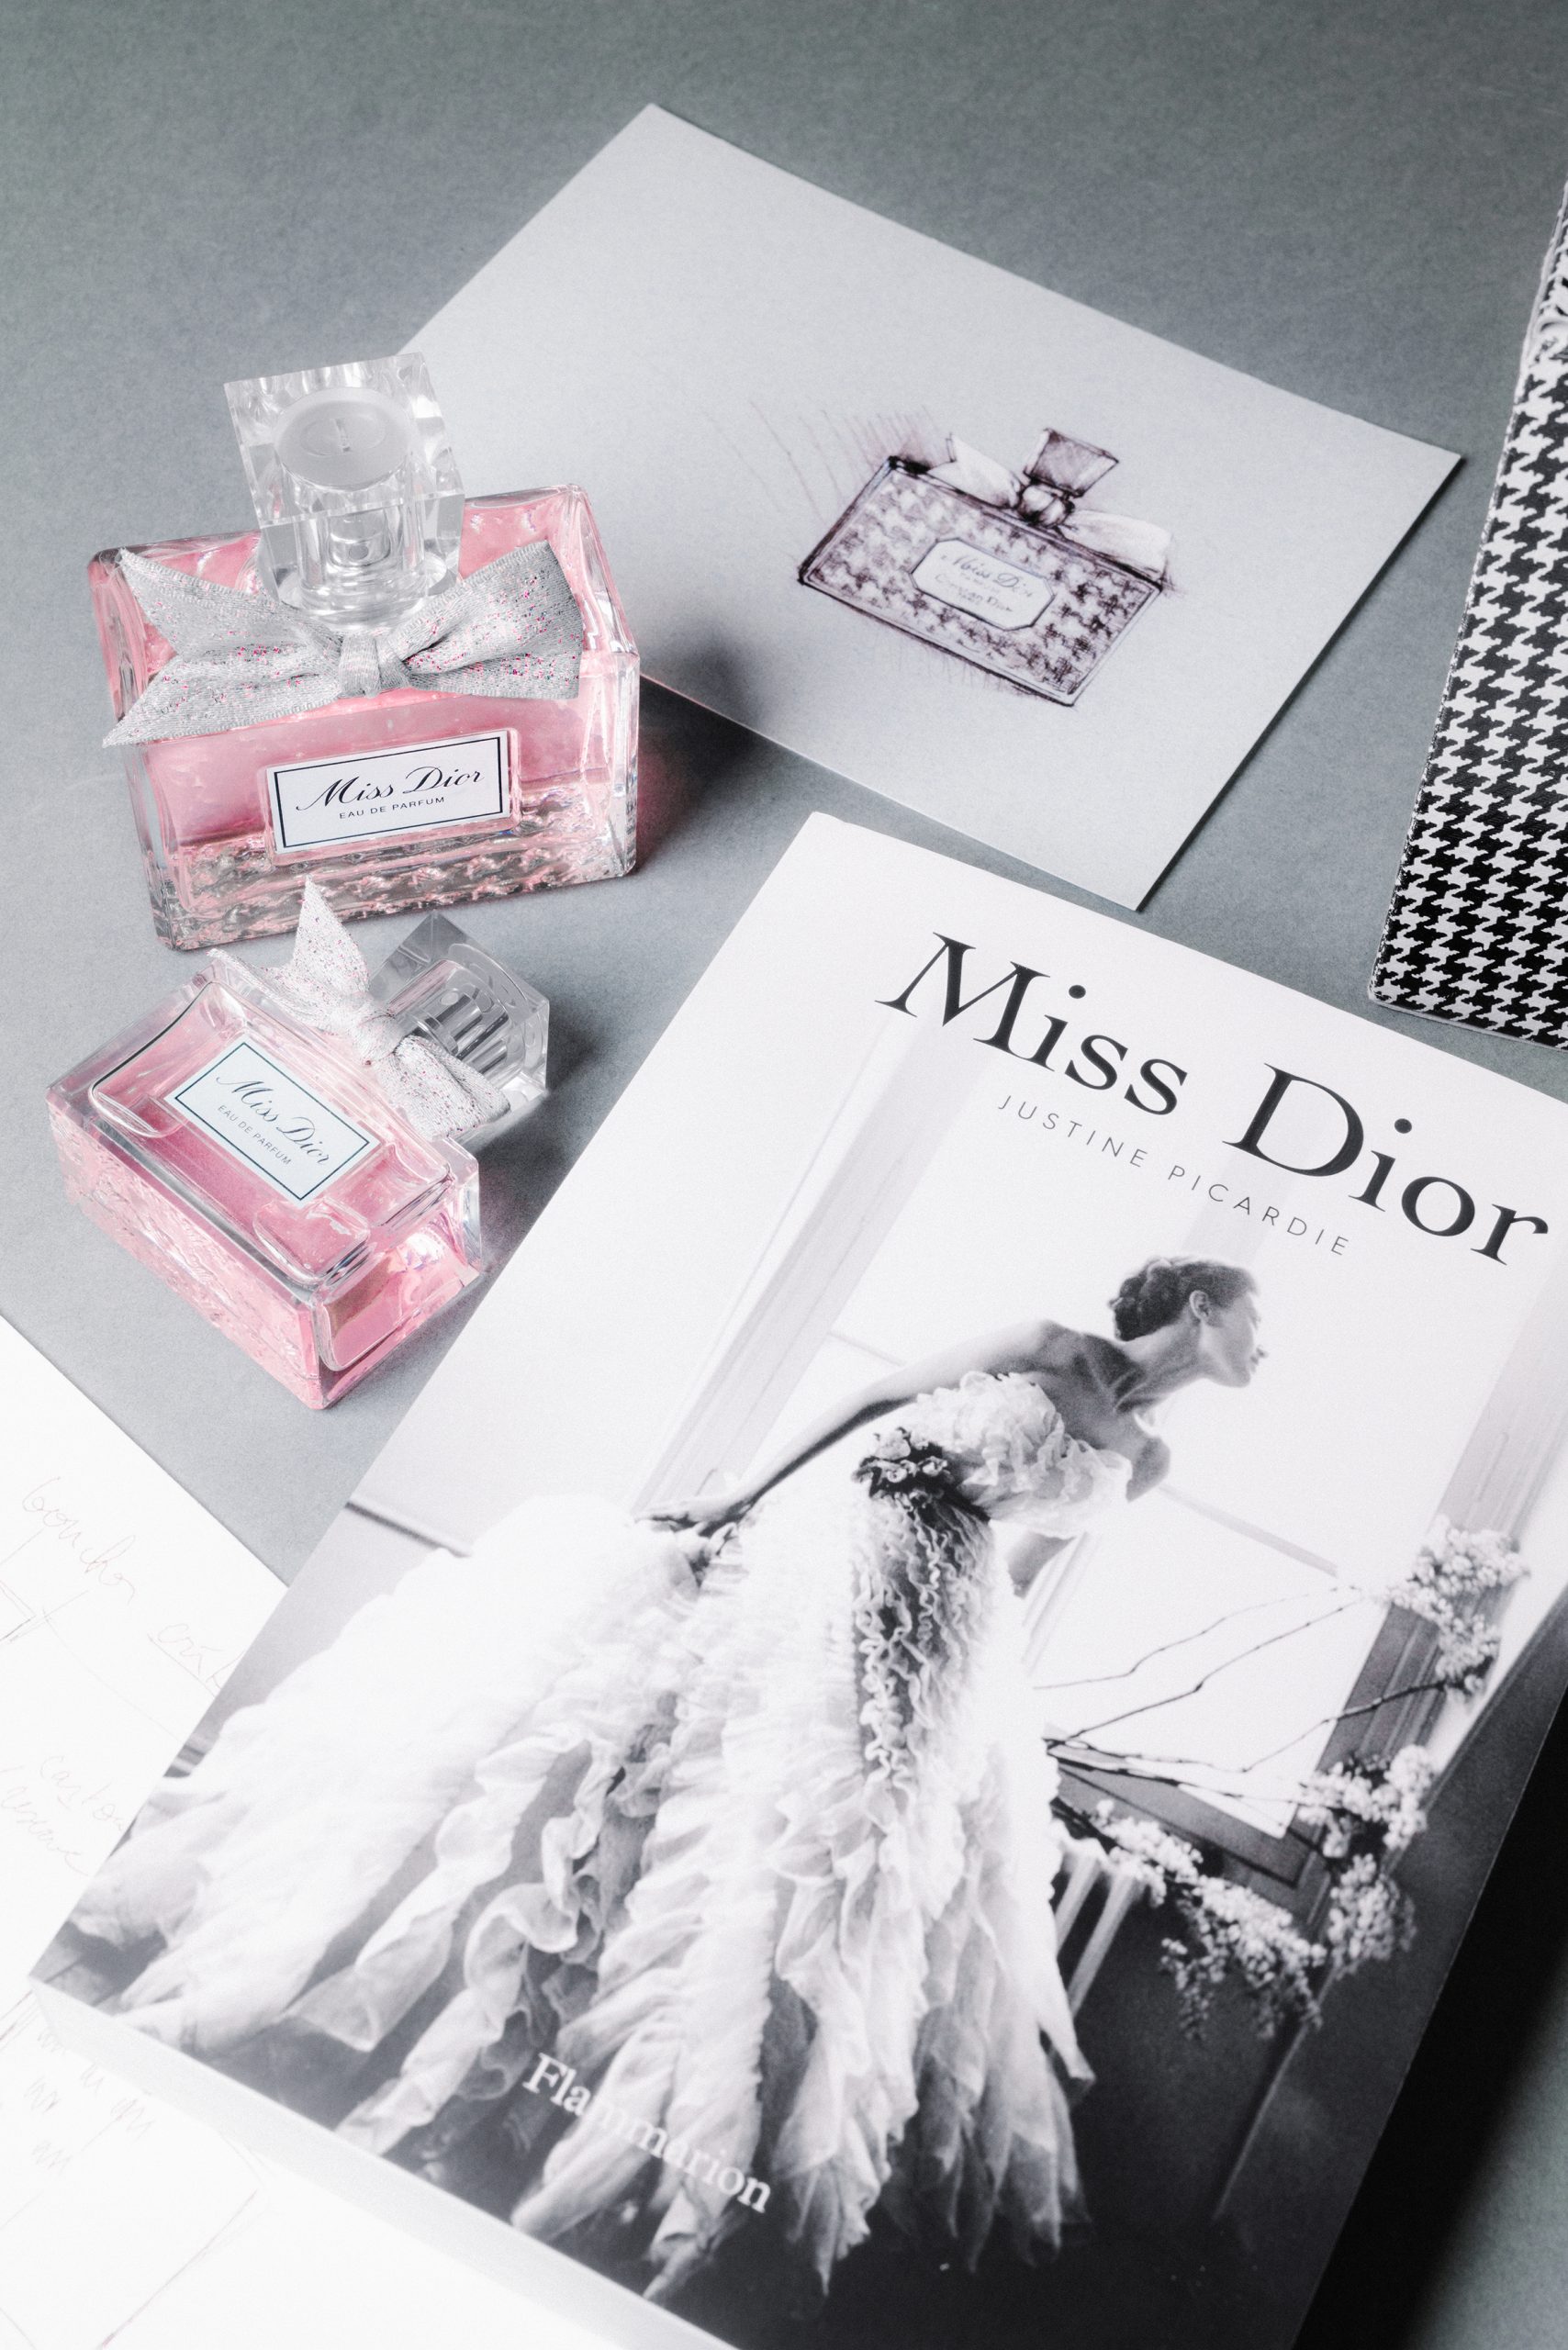 "A Story of Courage and Couture": H Miss Dior... έγινε βιβλίο.